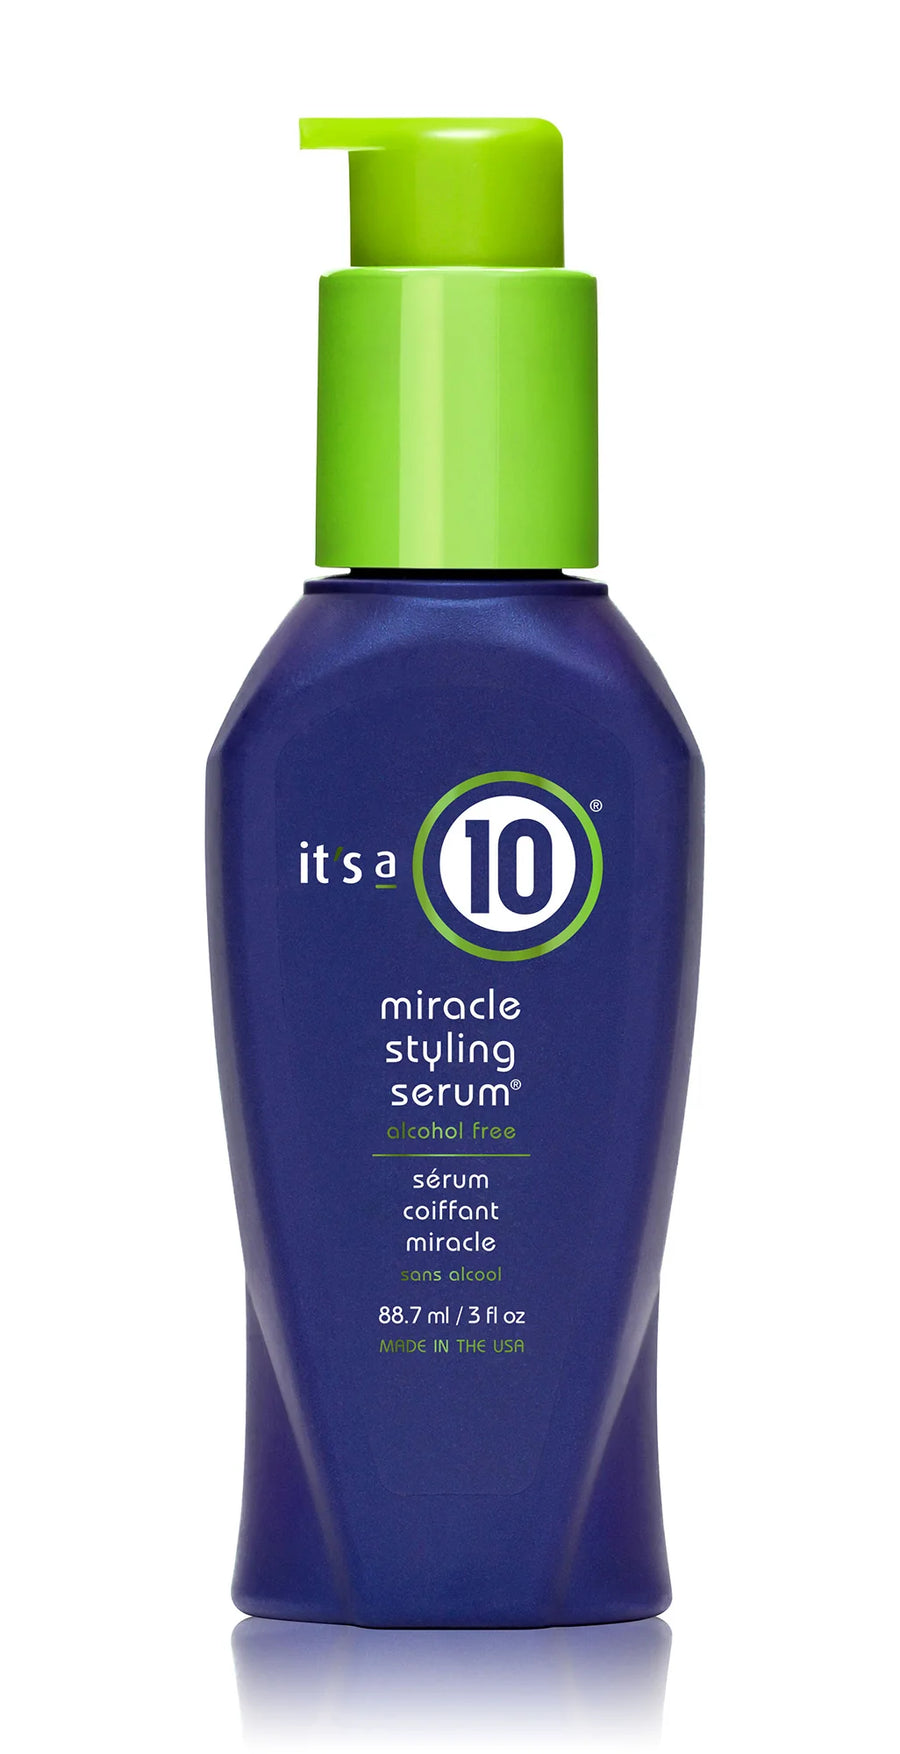 It's a 10 Miracle Styling Serum 4 oz bottle image